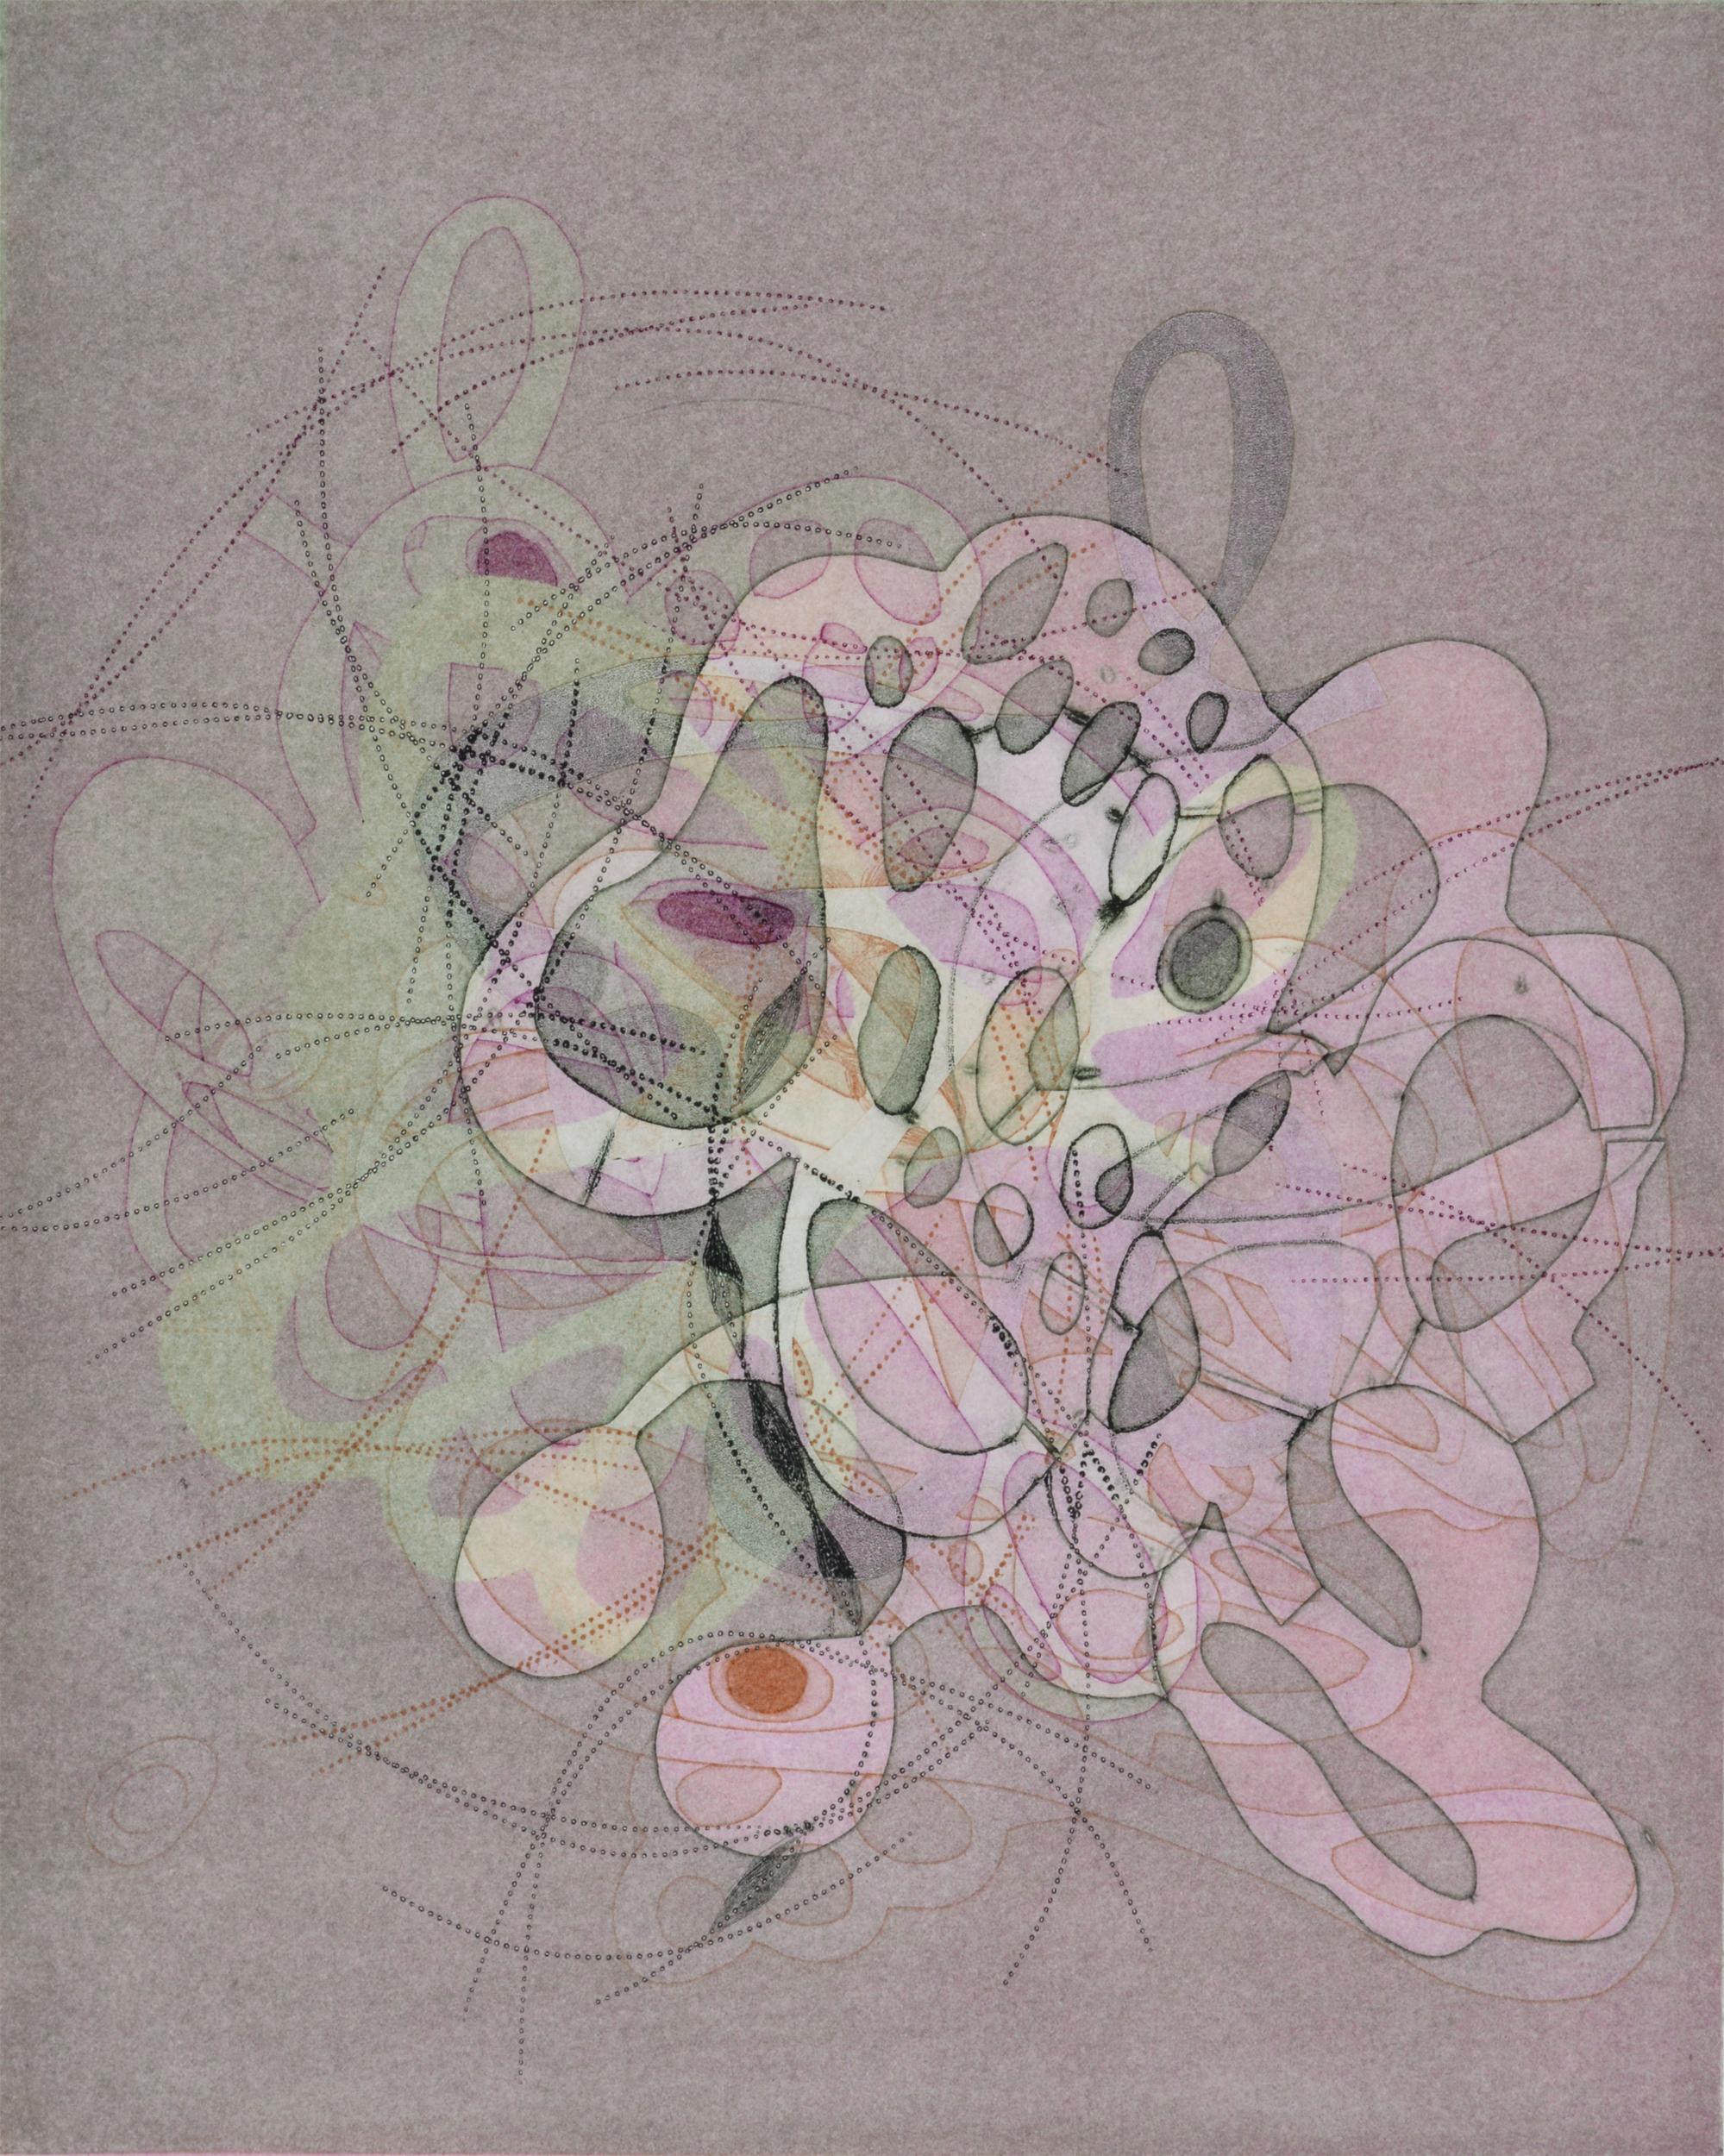 Taiko Chandler Abstract Print - "On and On #13", delicate pastel colored organic, curvy abstract monoprint